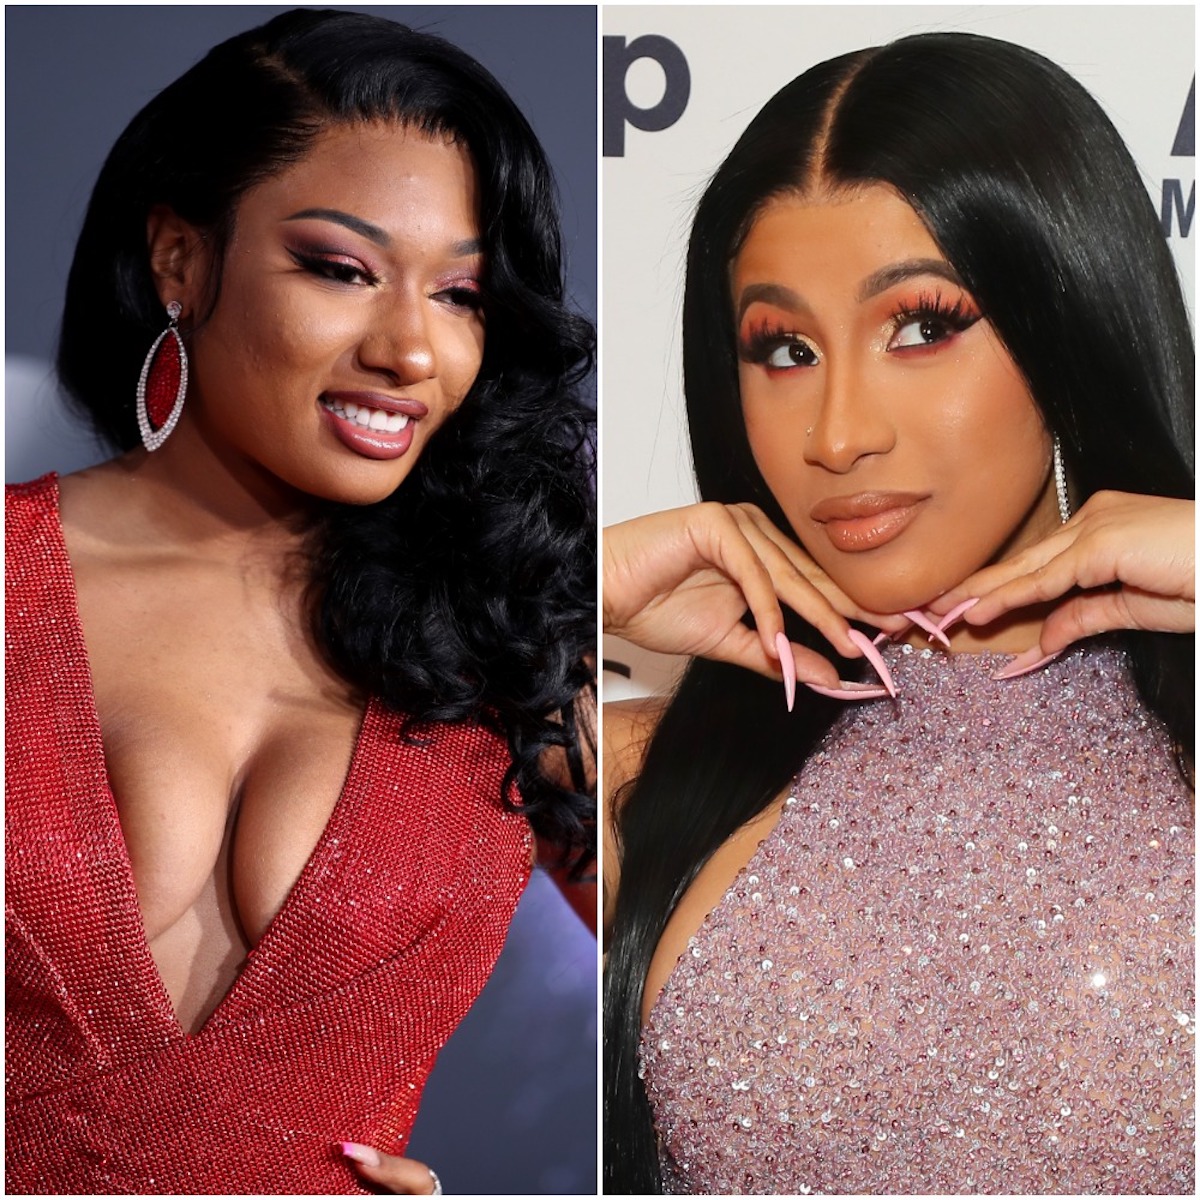 Megan Thee Stallion in a red dress and Cardi B in a pink outfit